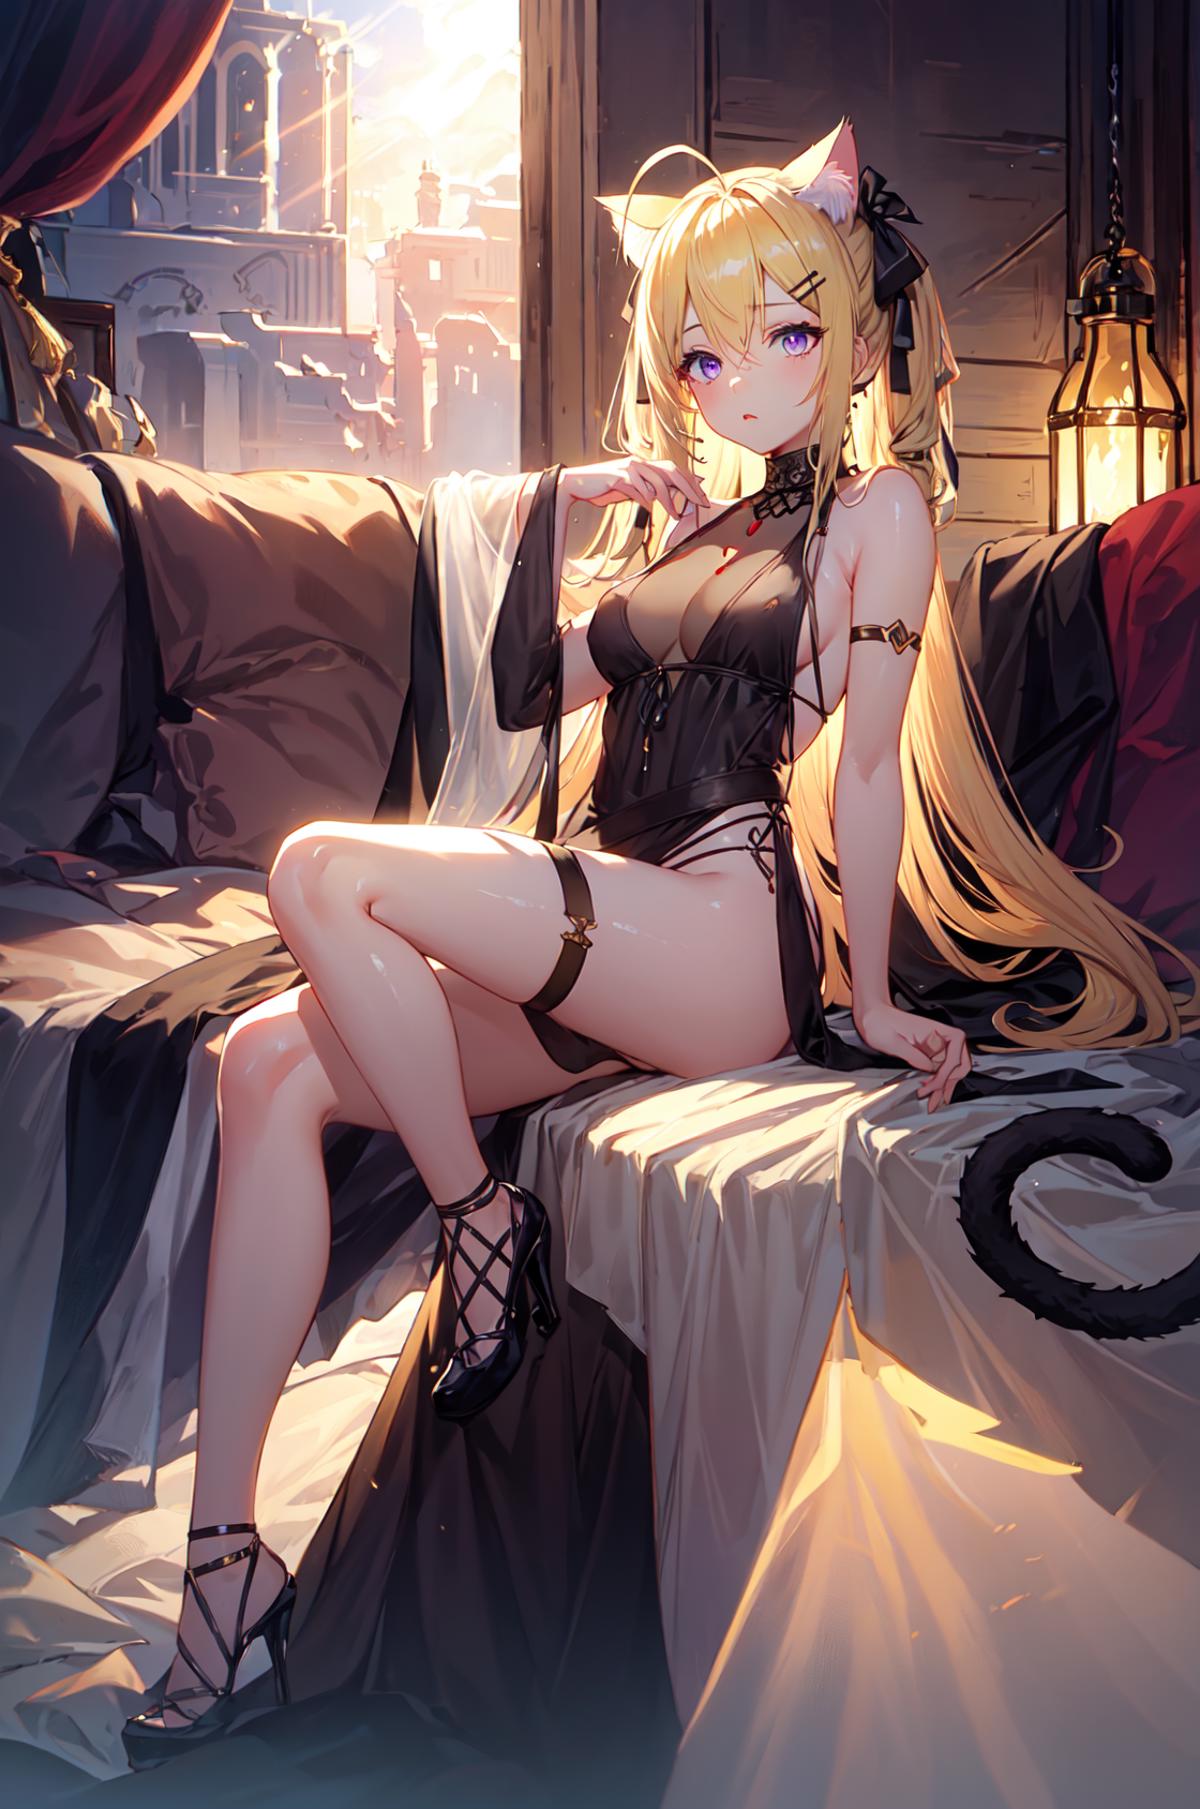 [LoRa] DSR-50 (Highest Bid)-cosplay Girls' frontline Clothing (With multires noise version) image by loril